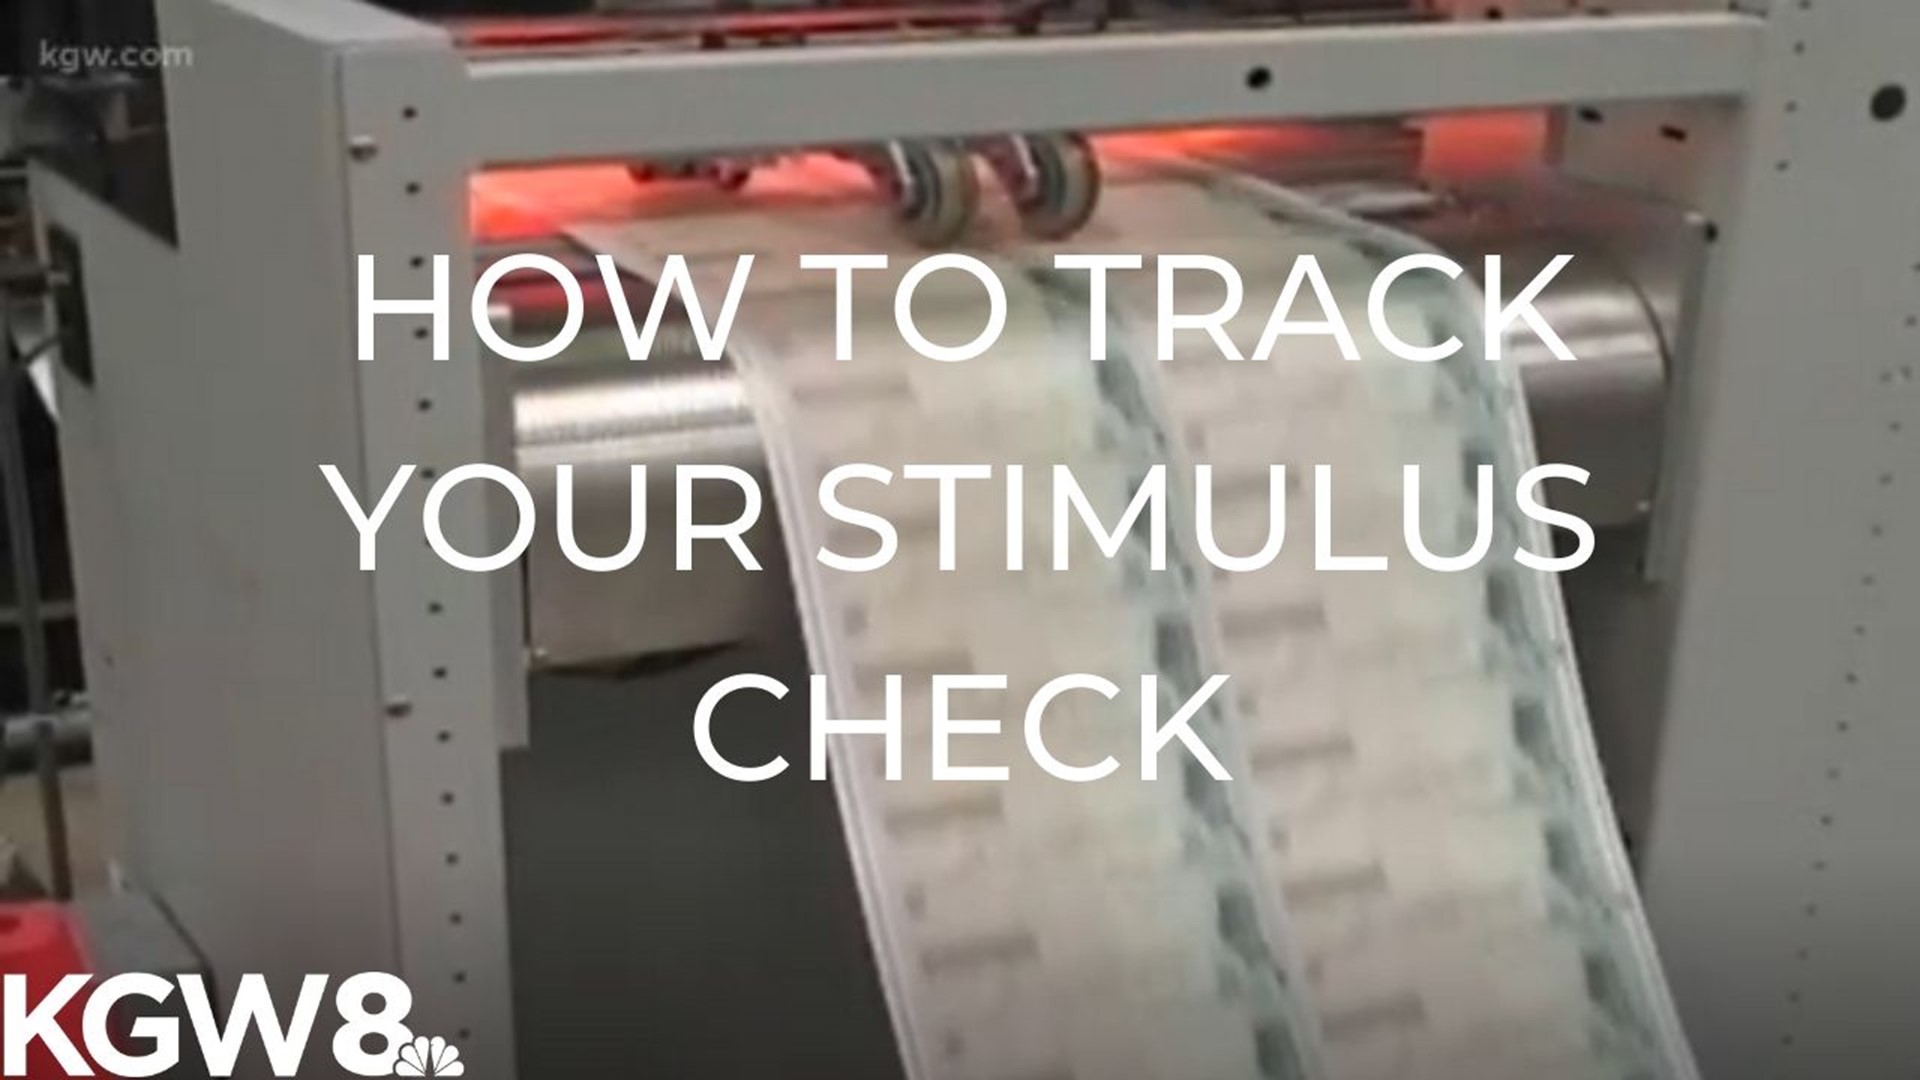 Where's my stimulus check? IRS tracking tool is live ...